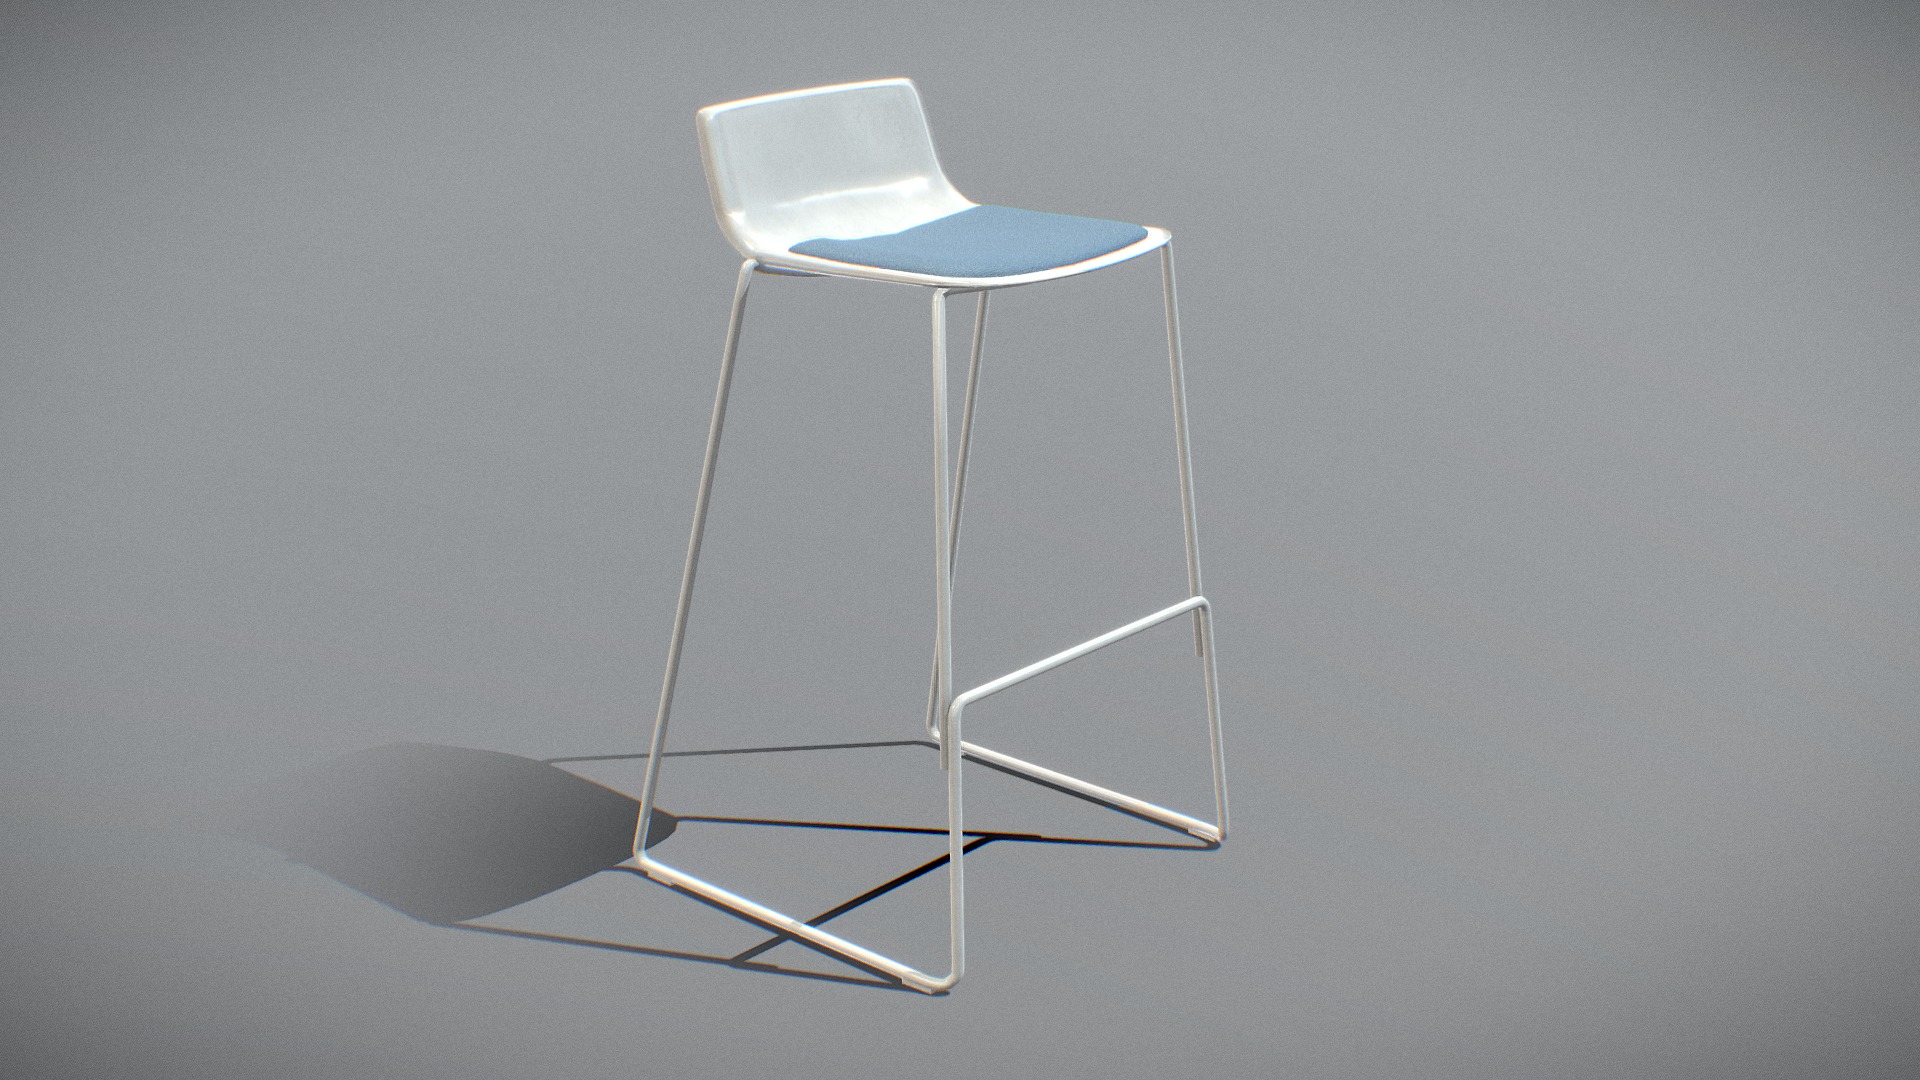 3D model PATo Stool-Model 4310 V-02-White Painted - This is a 3D model of the PATo Stool-Model 4310 V-02-White Painted. The 3D model is about a chair with a blue cushion.